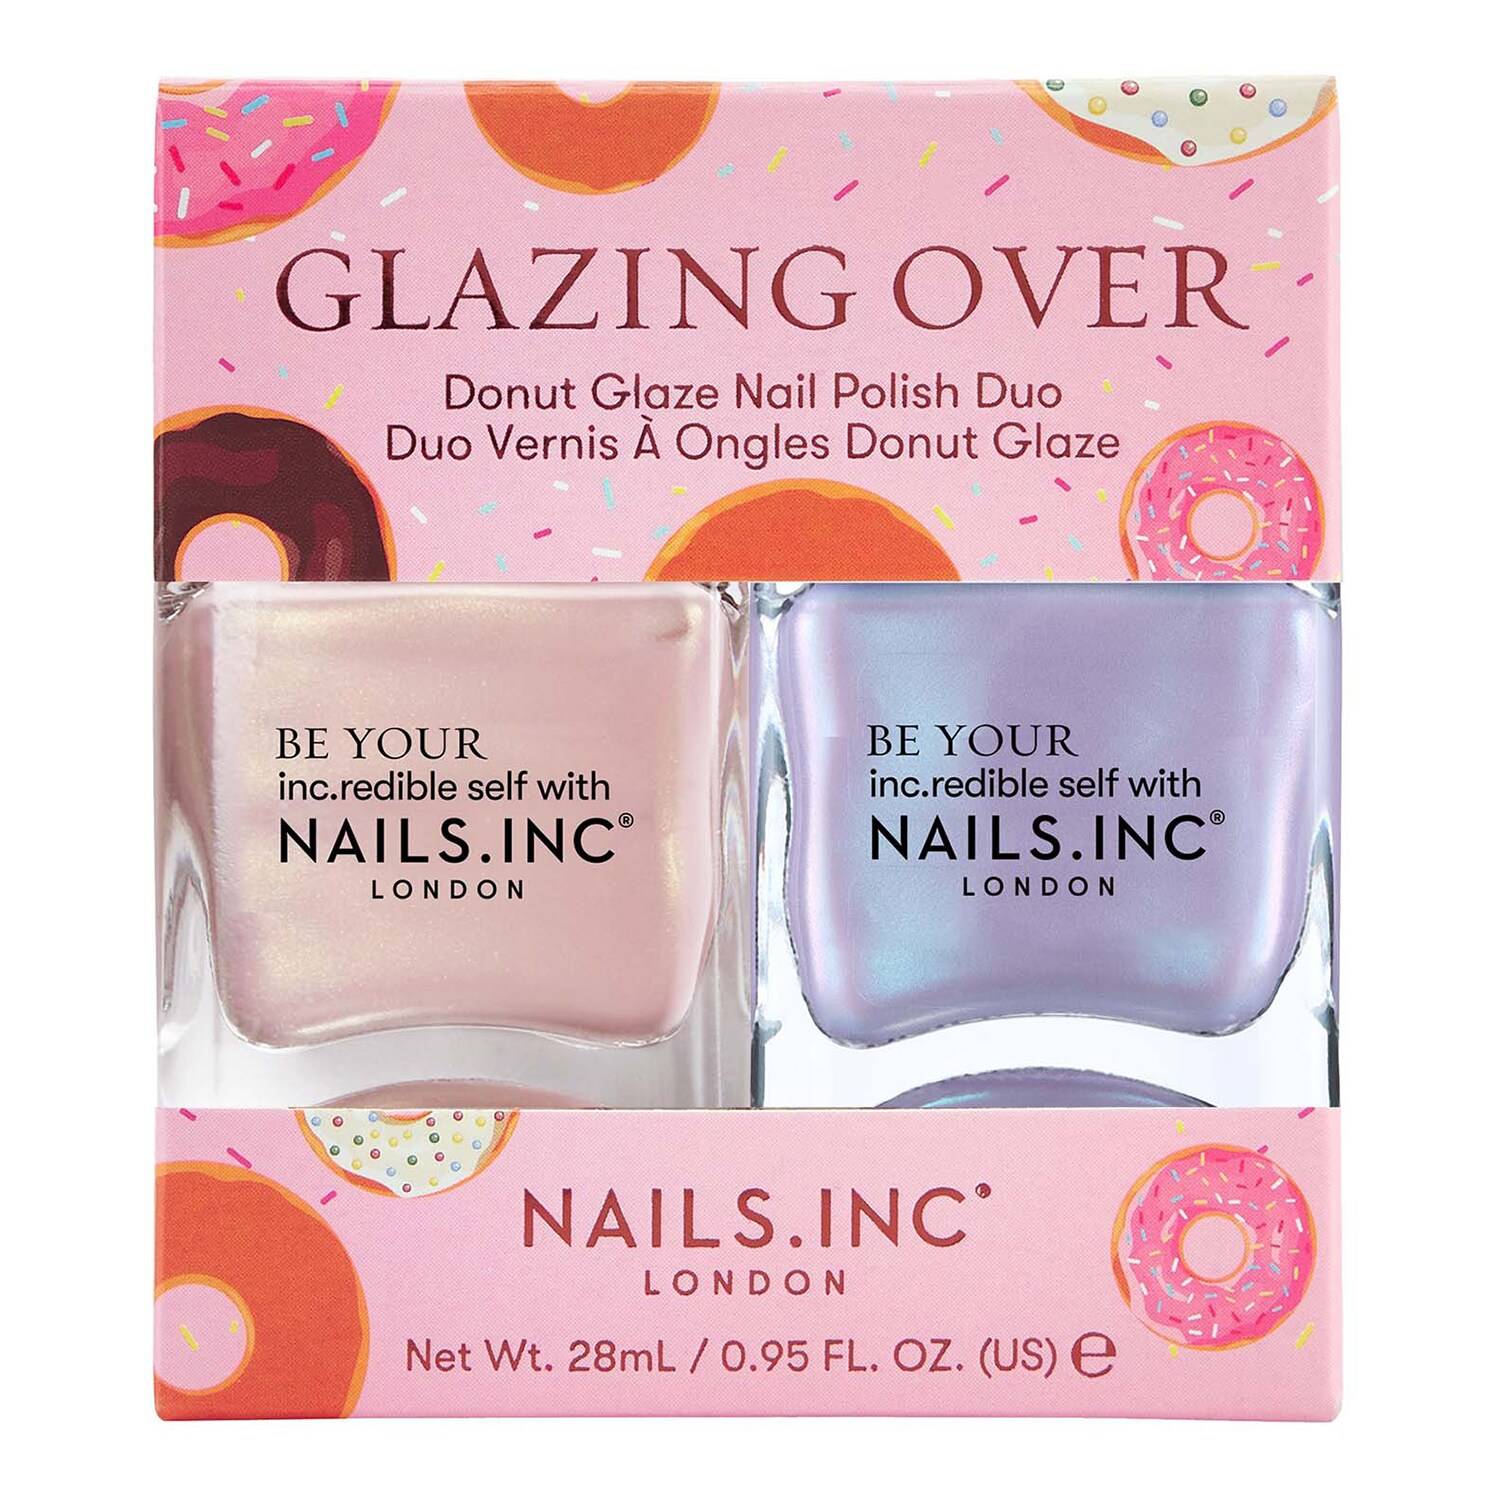 Nails Inc Glazing Over Duo